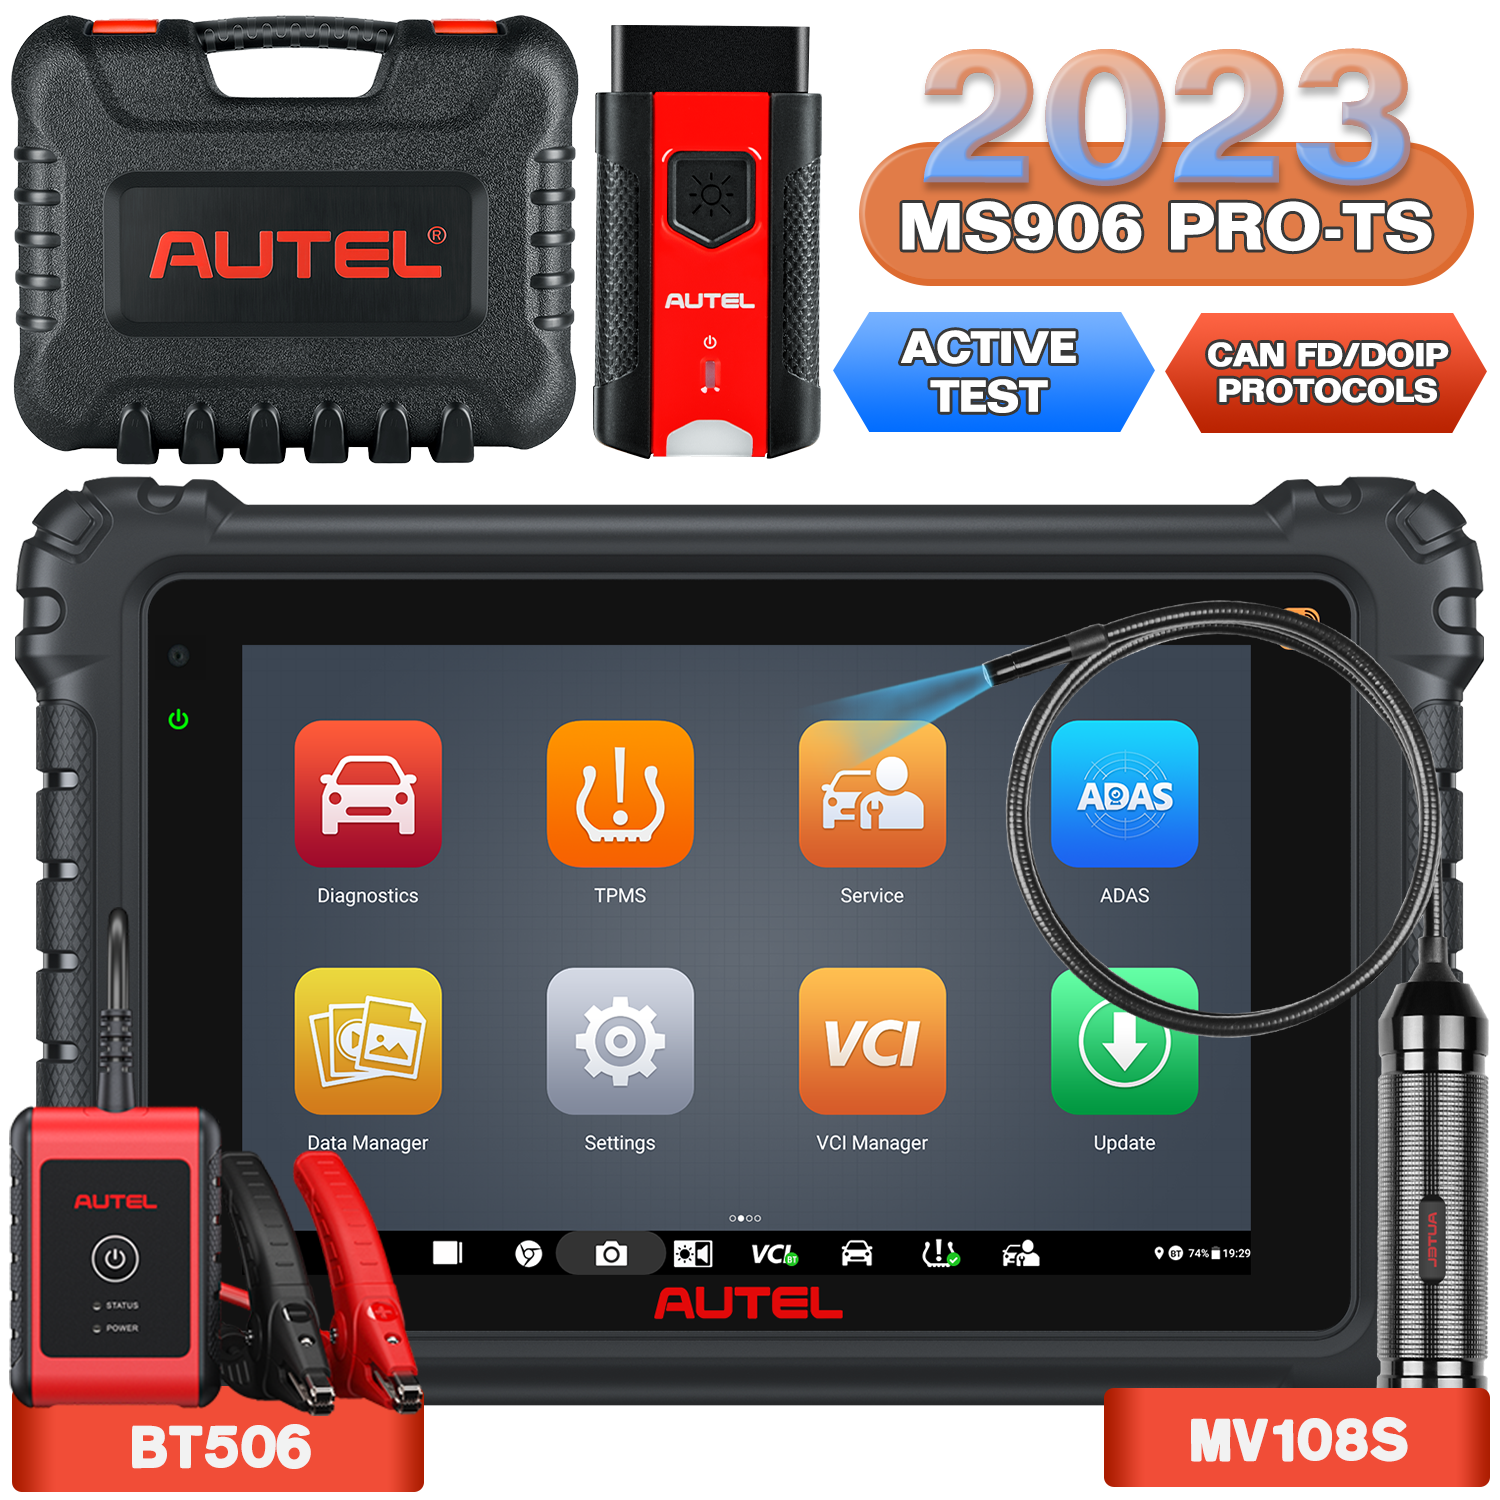 Autel MaxiSYS MS906 Pro-TS Diagnostic Scanner Complete TPMS Function –  DiagMart